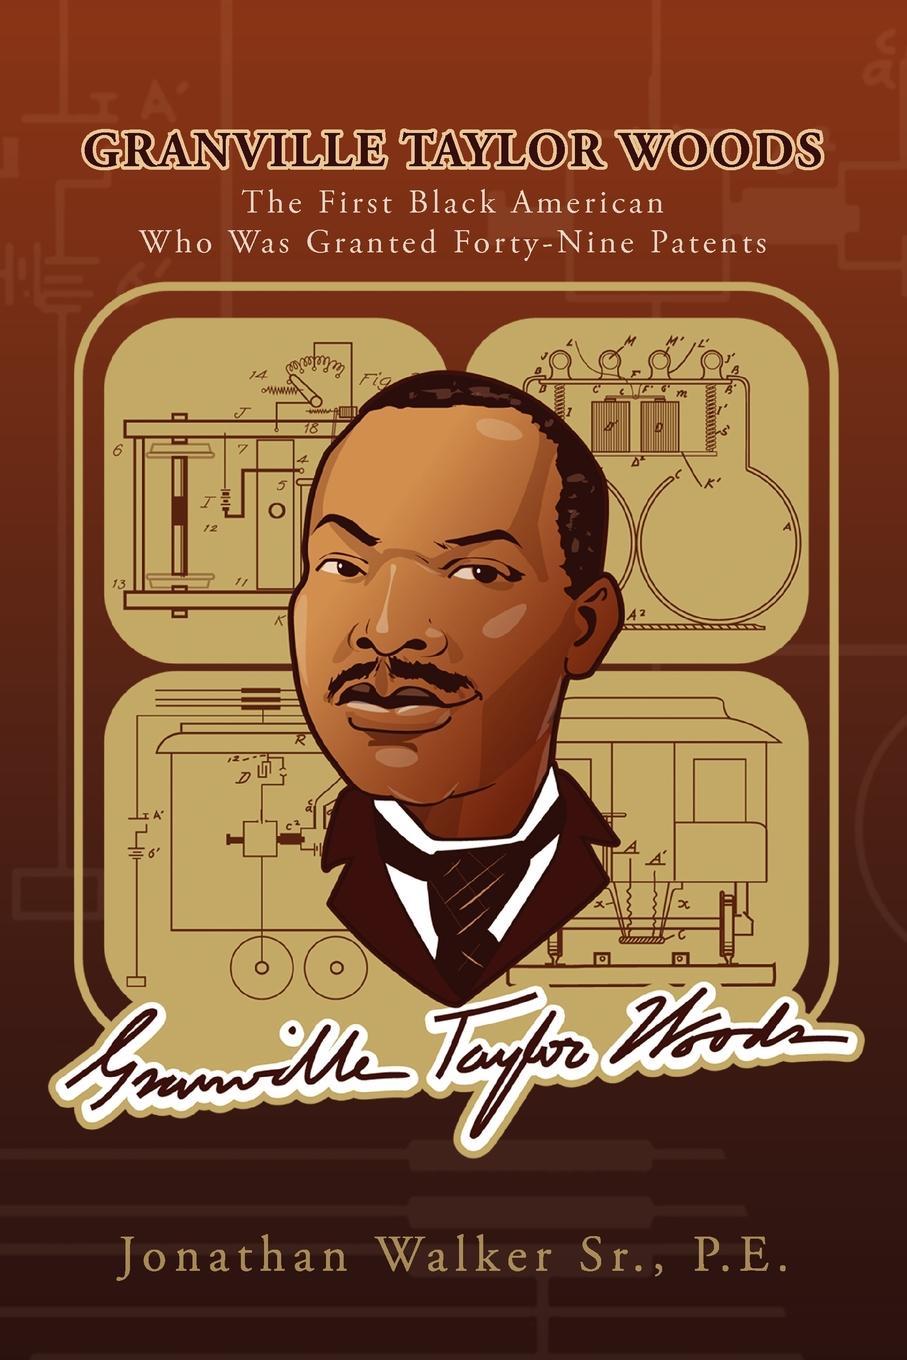 Granville Taylor Woods. The First Black American Who Was Granted Forty-Nine Patents